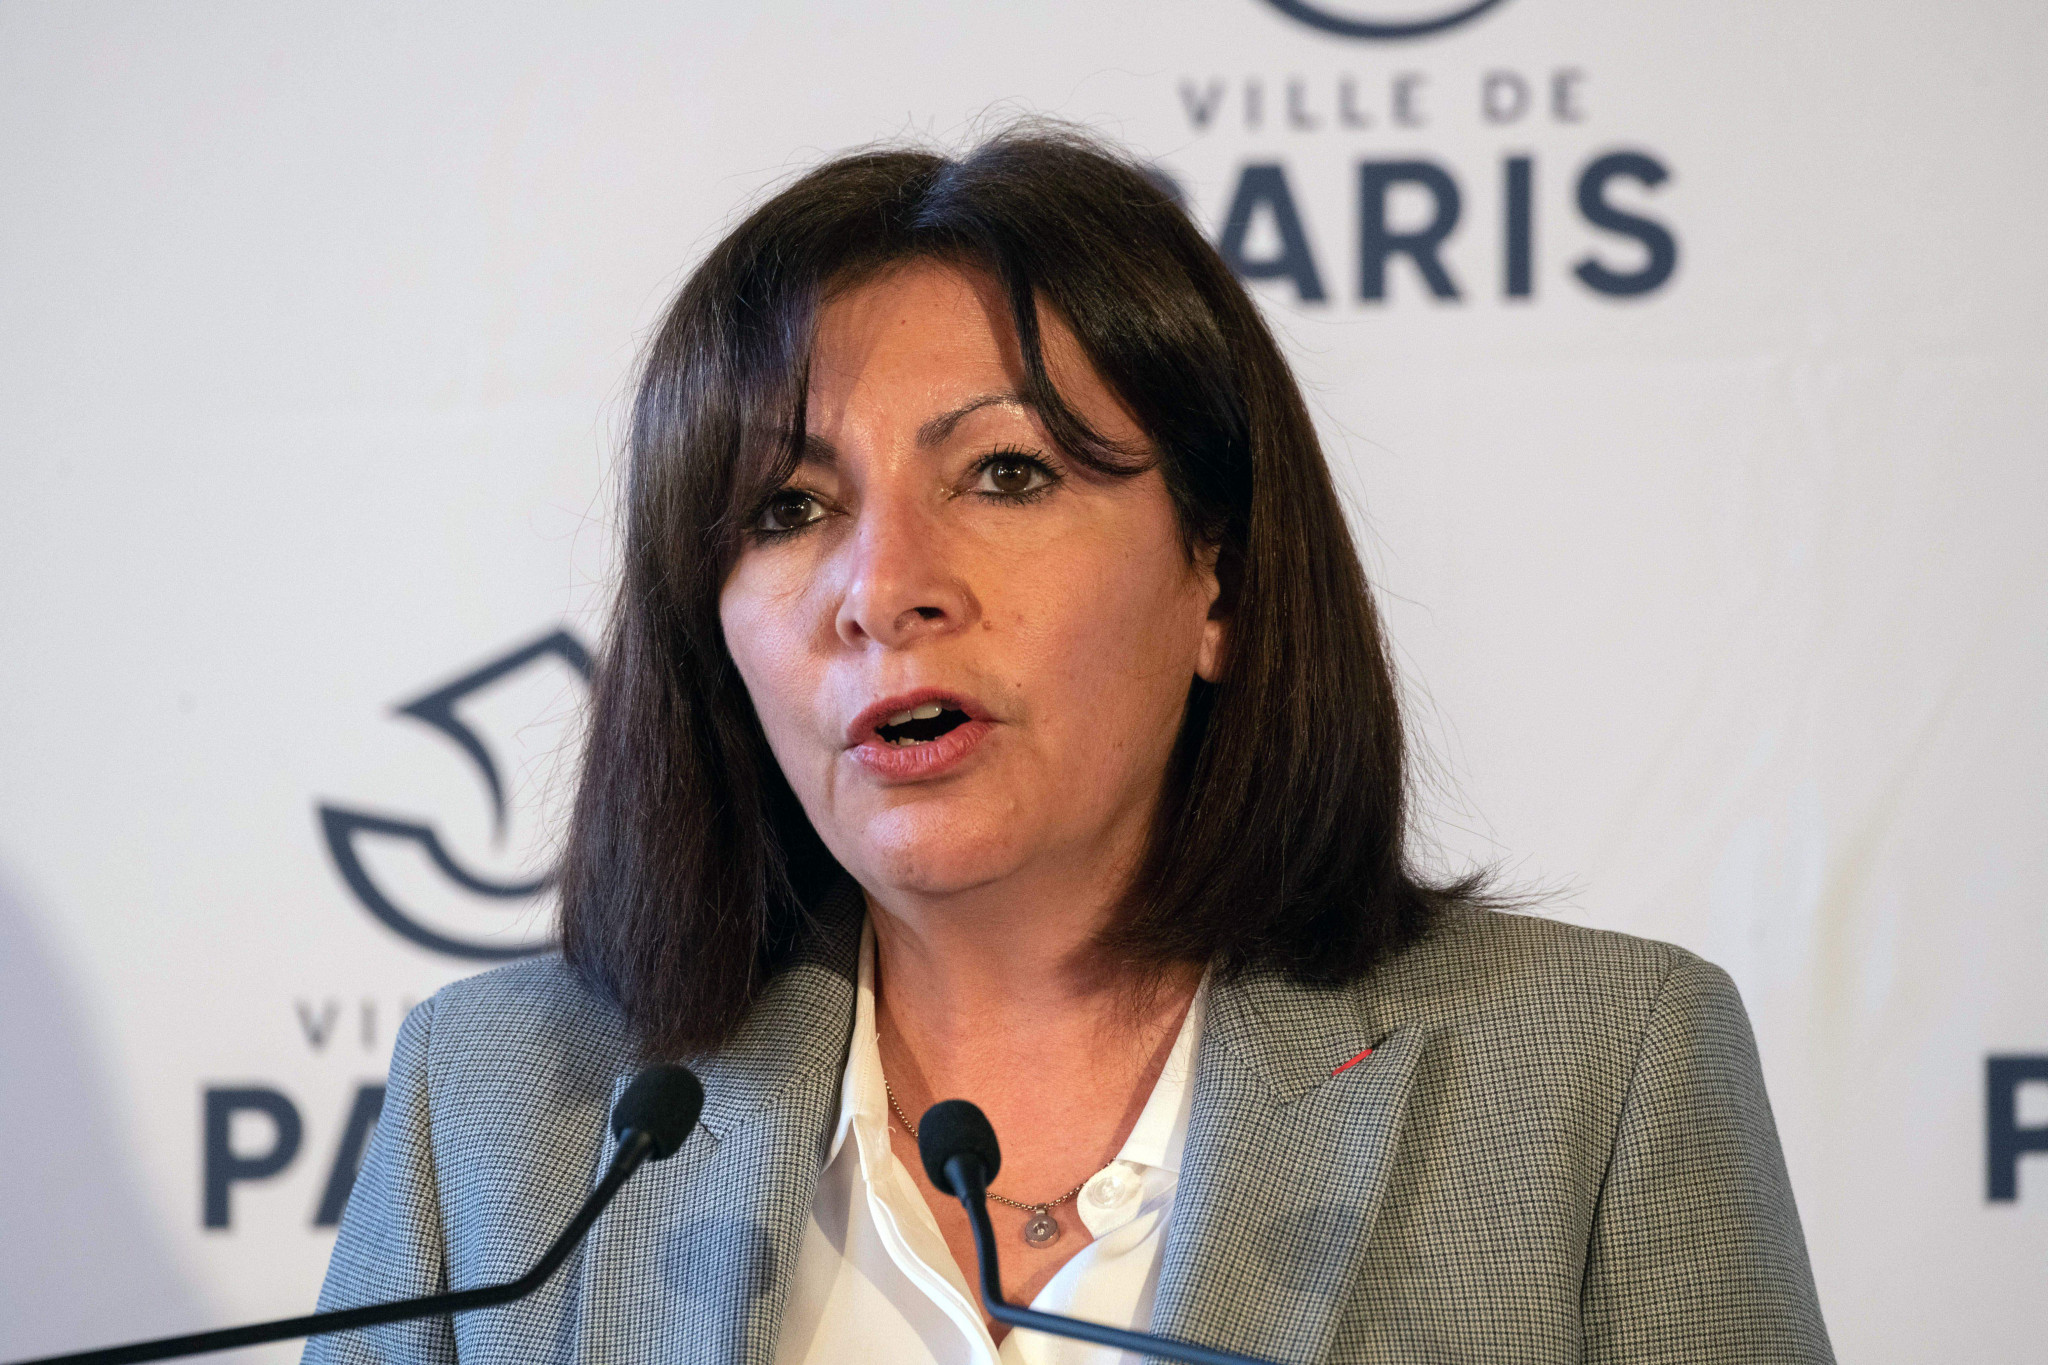 Paris Mayor Anne Hidalgo has said organisers are on track with preparations for the Olympic and Paralympic Games ©Getty Images